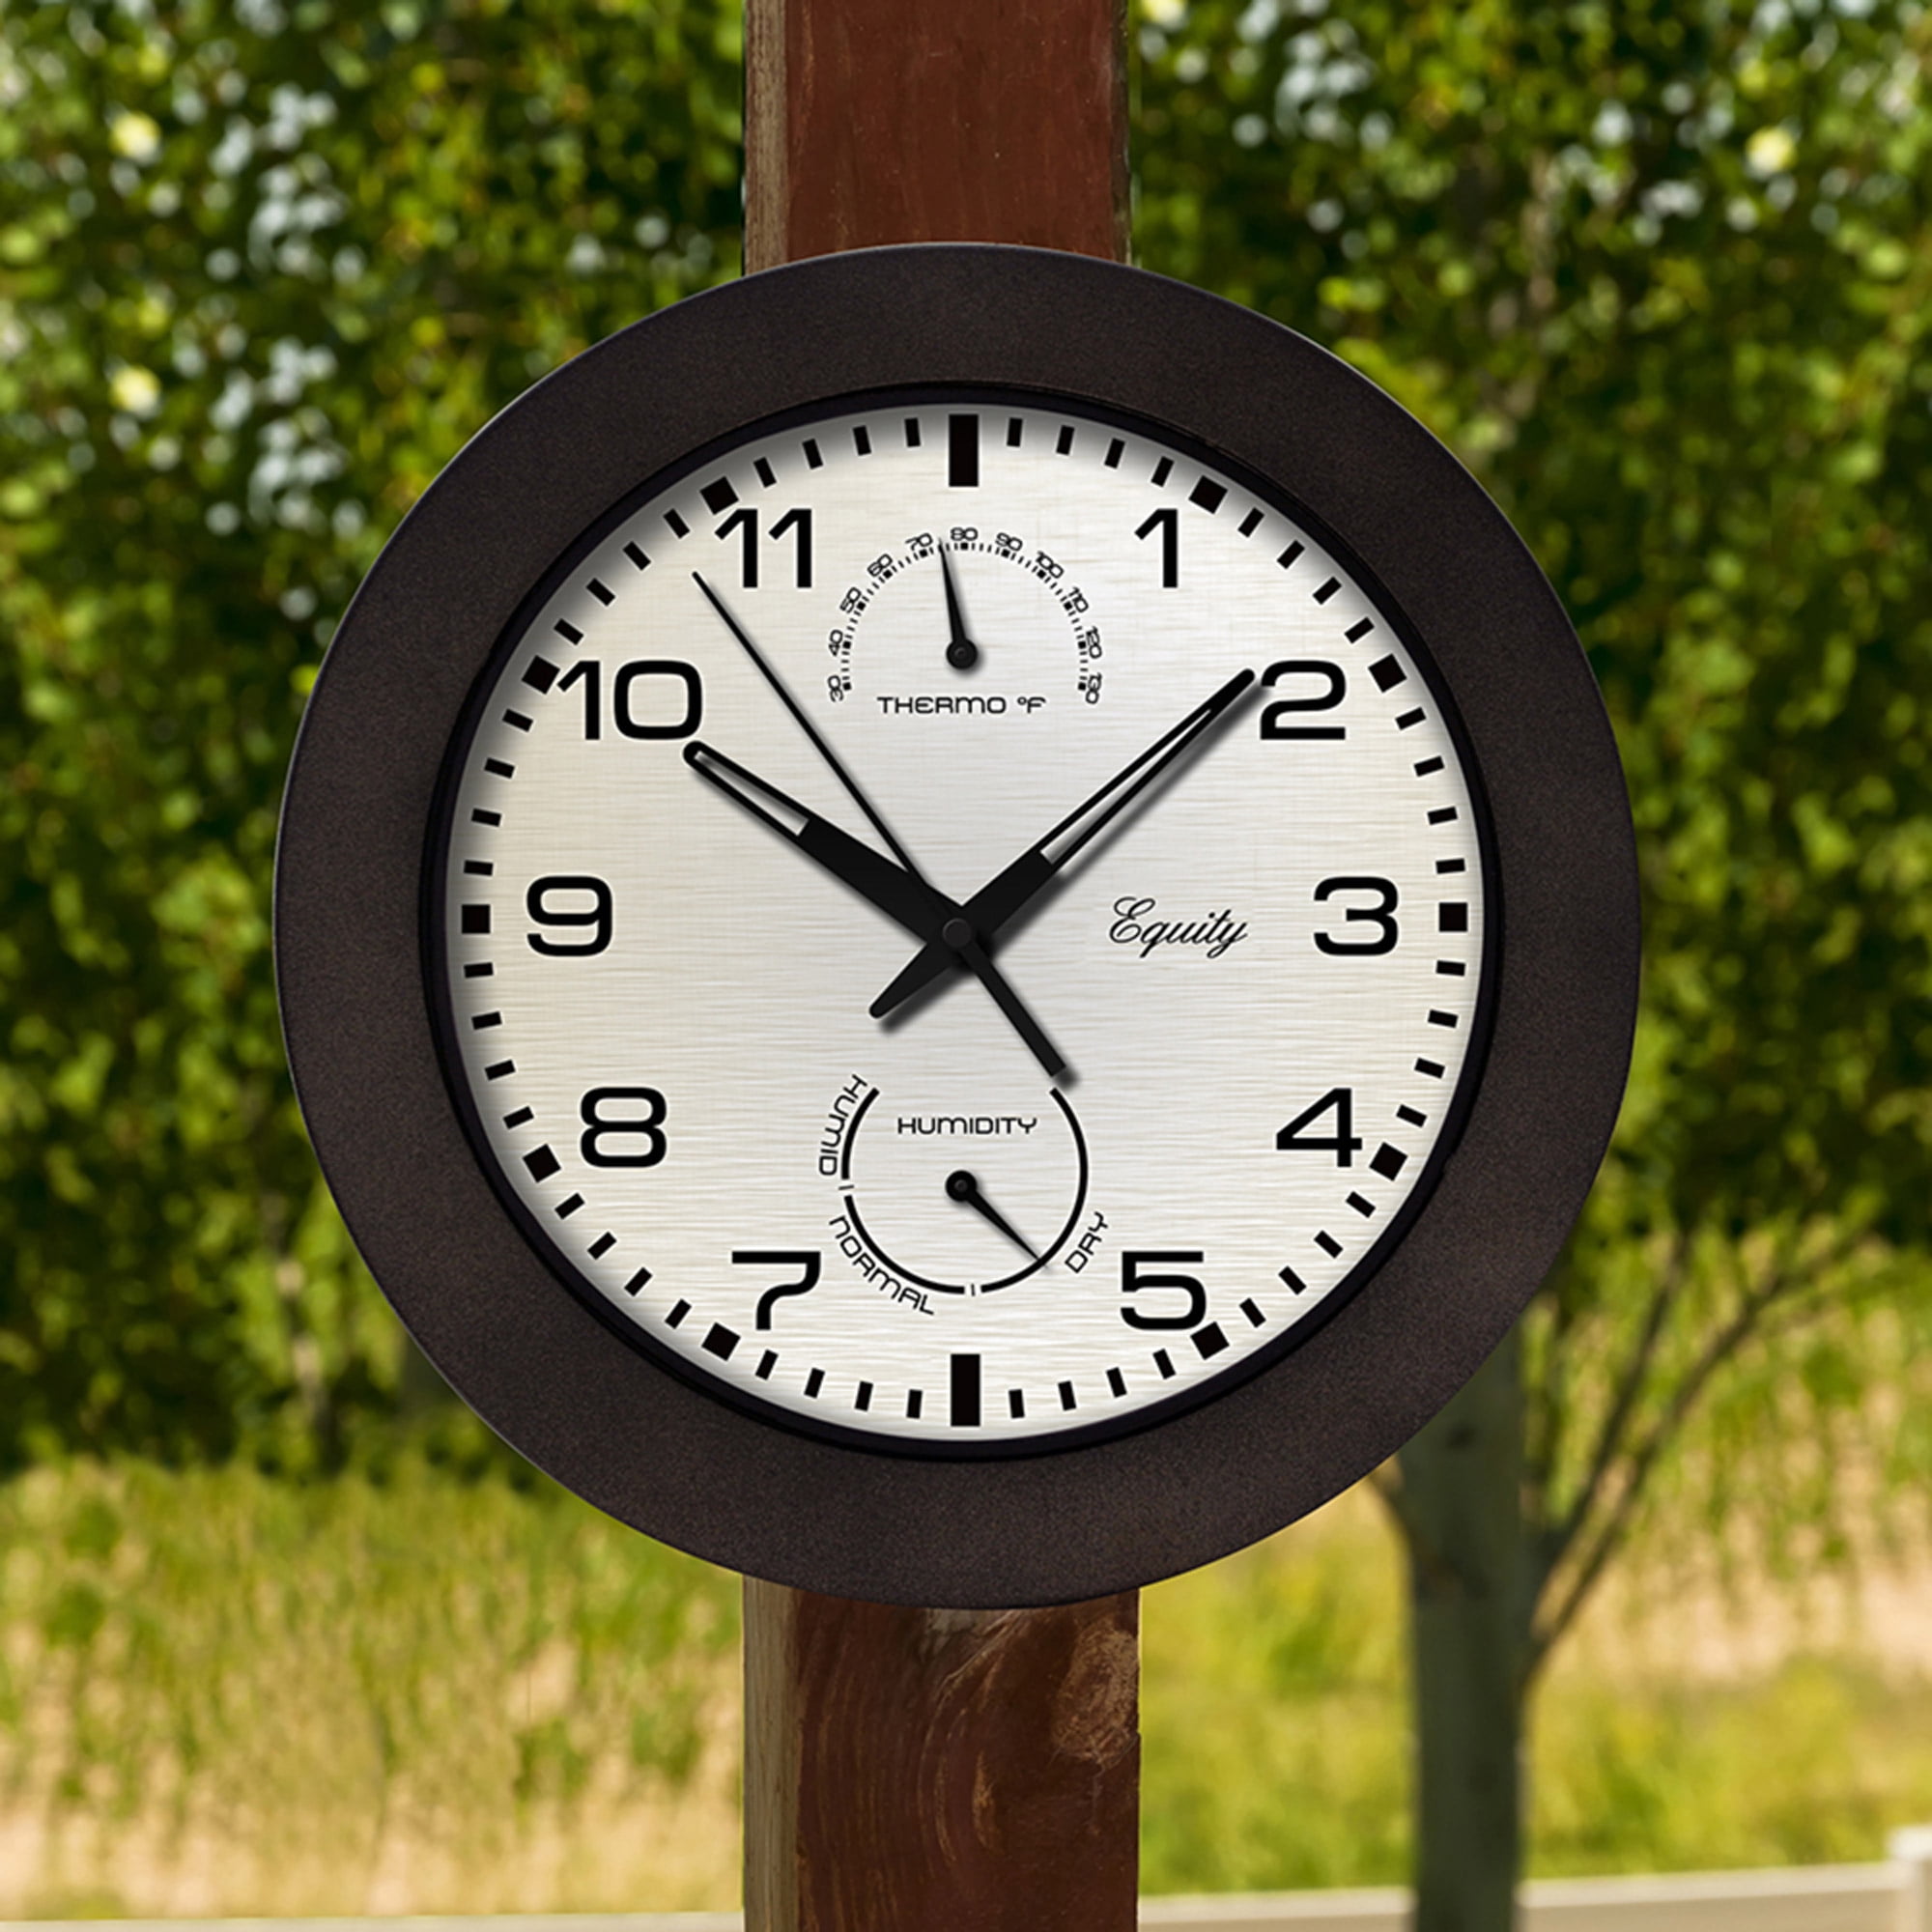 Equity by La Crosse 29005 Outdoor Thermometer and Humidity Wall Clock Brown 10